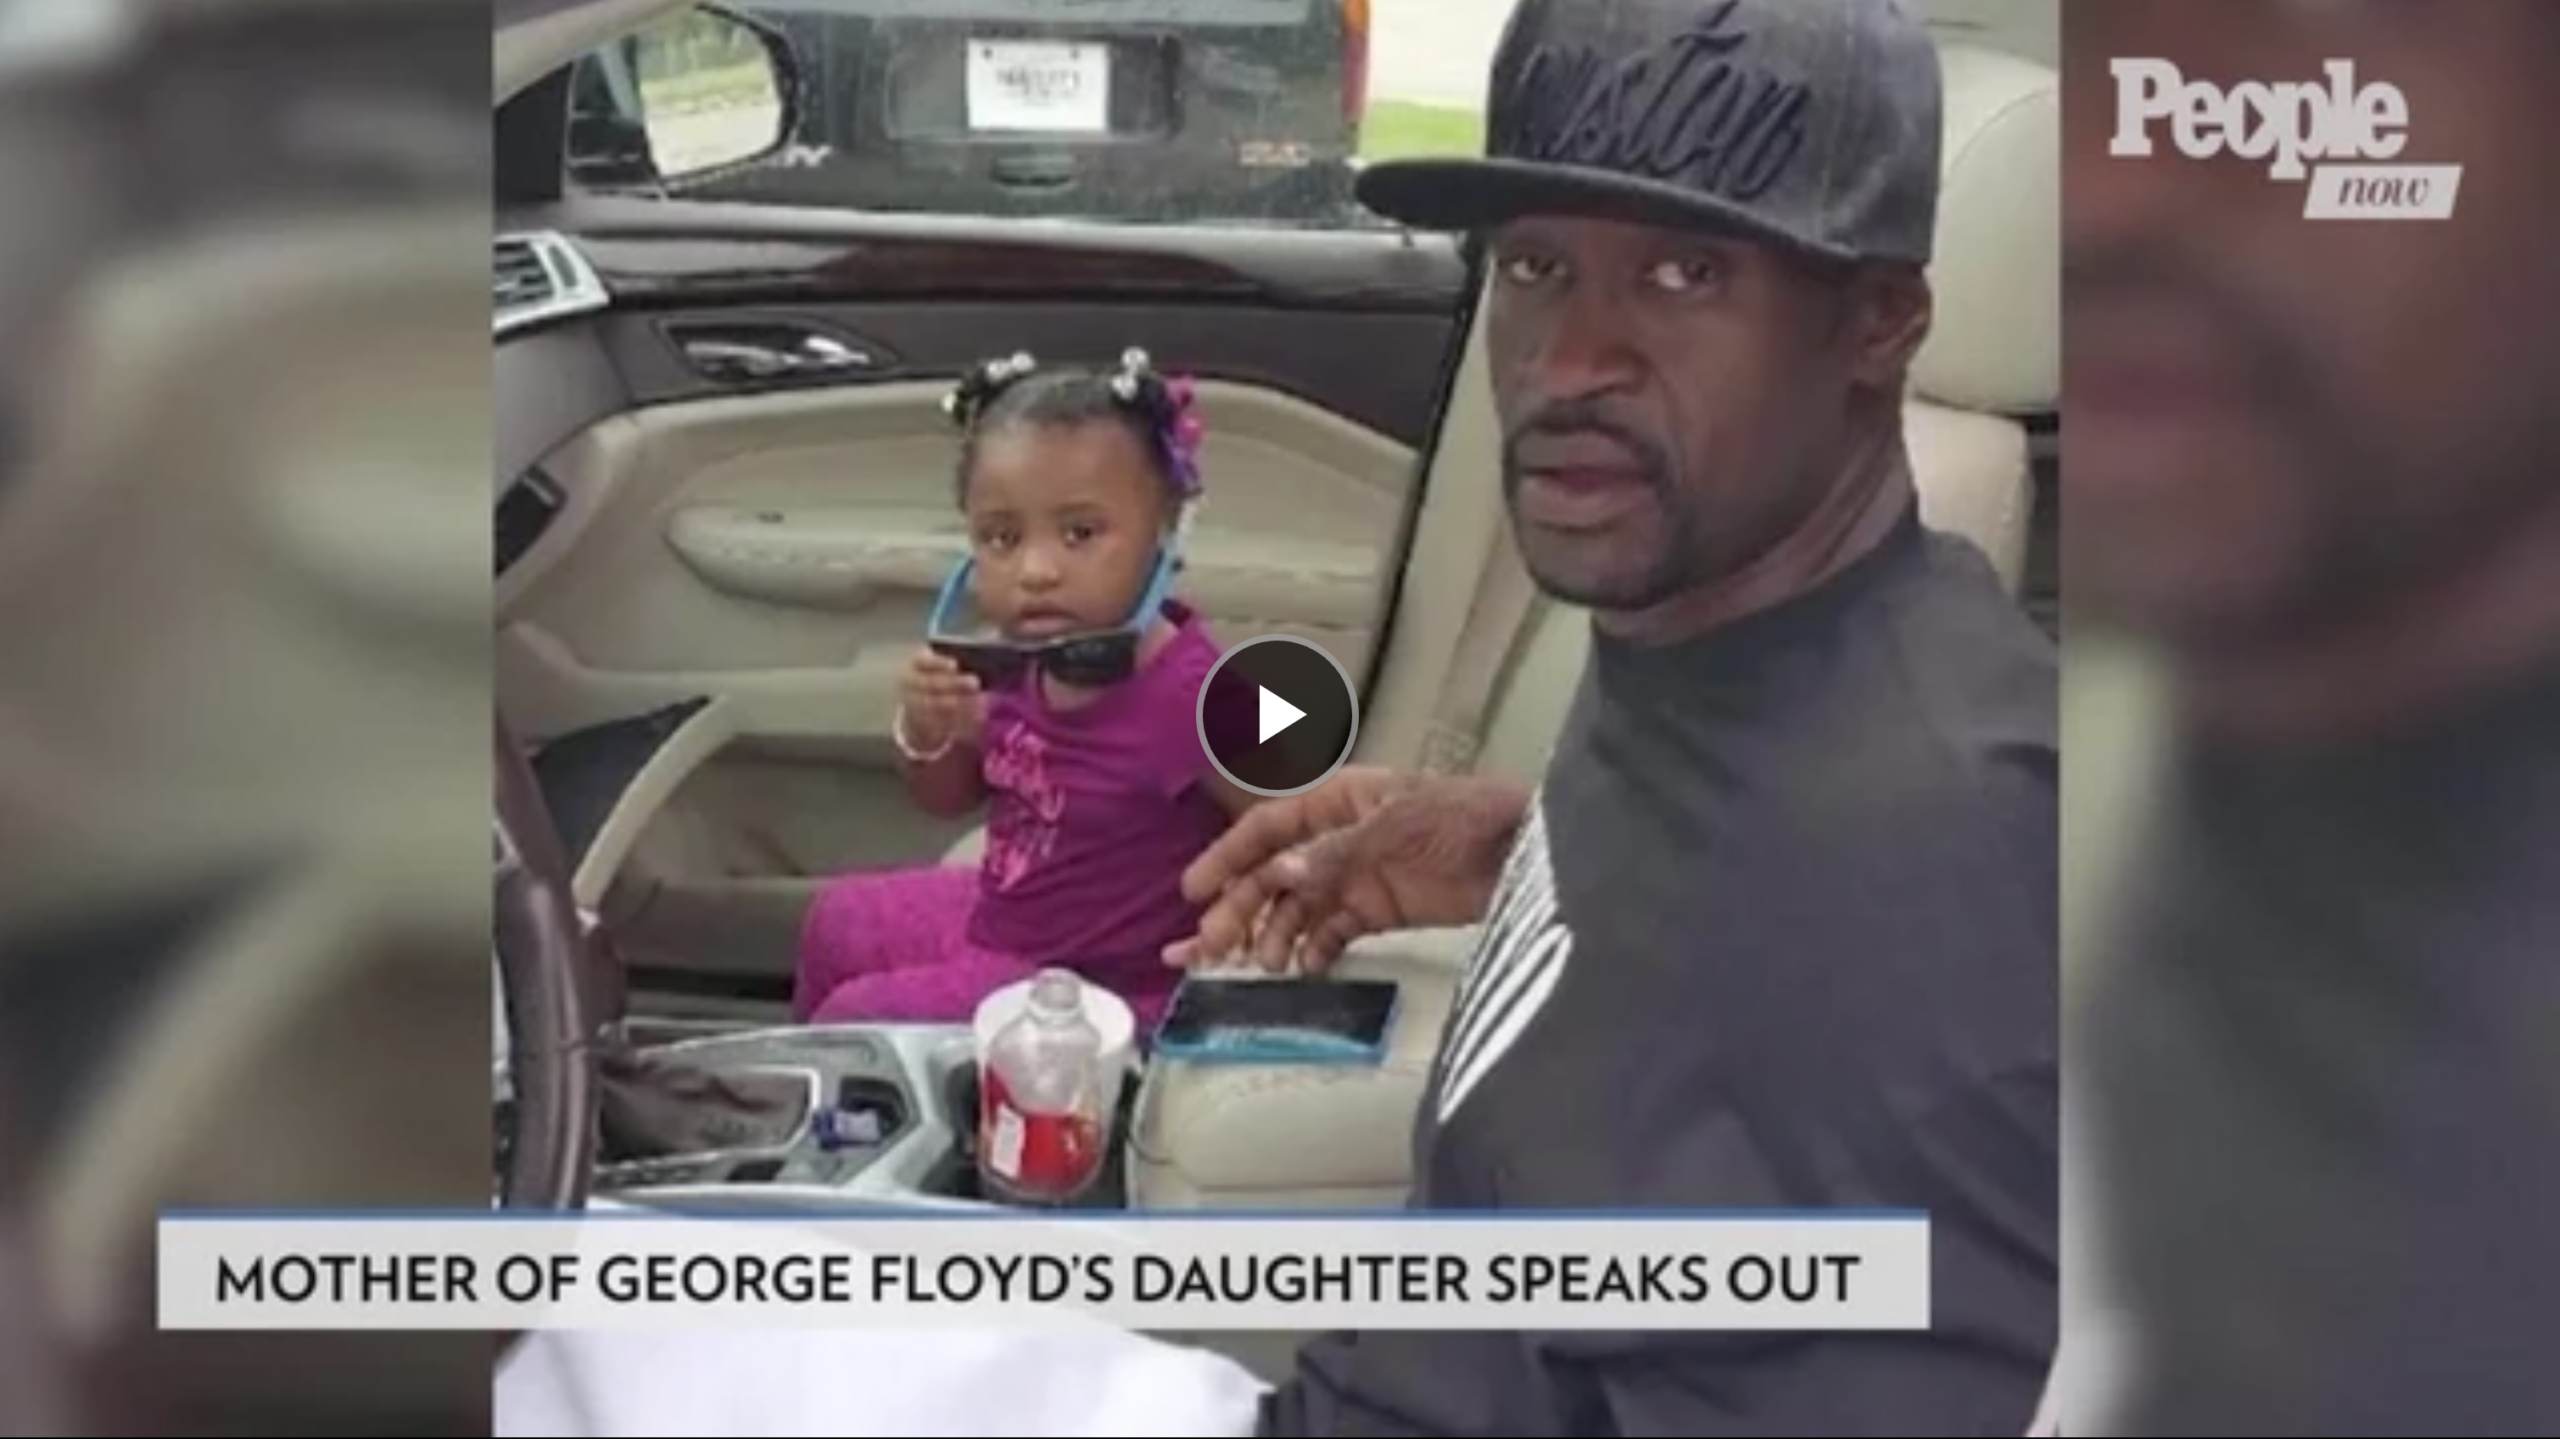 Mother of George Floyd’s Daughter Sues Kanye West for $250 Million for Saying George Floyd Died from Fentanyl – Causing them ‘Emotional Distress’